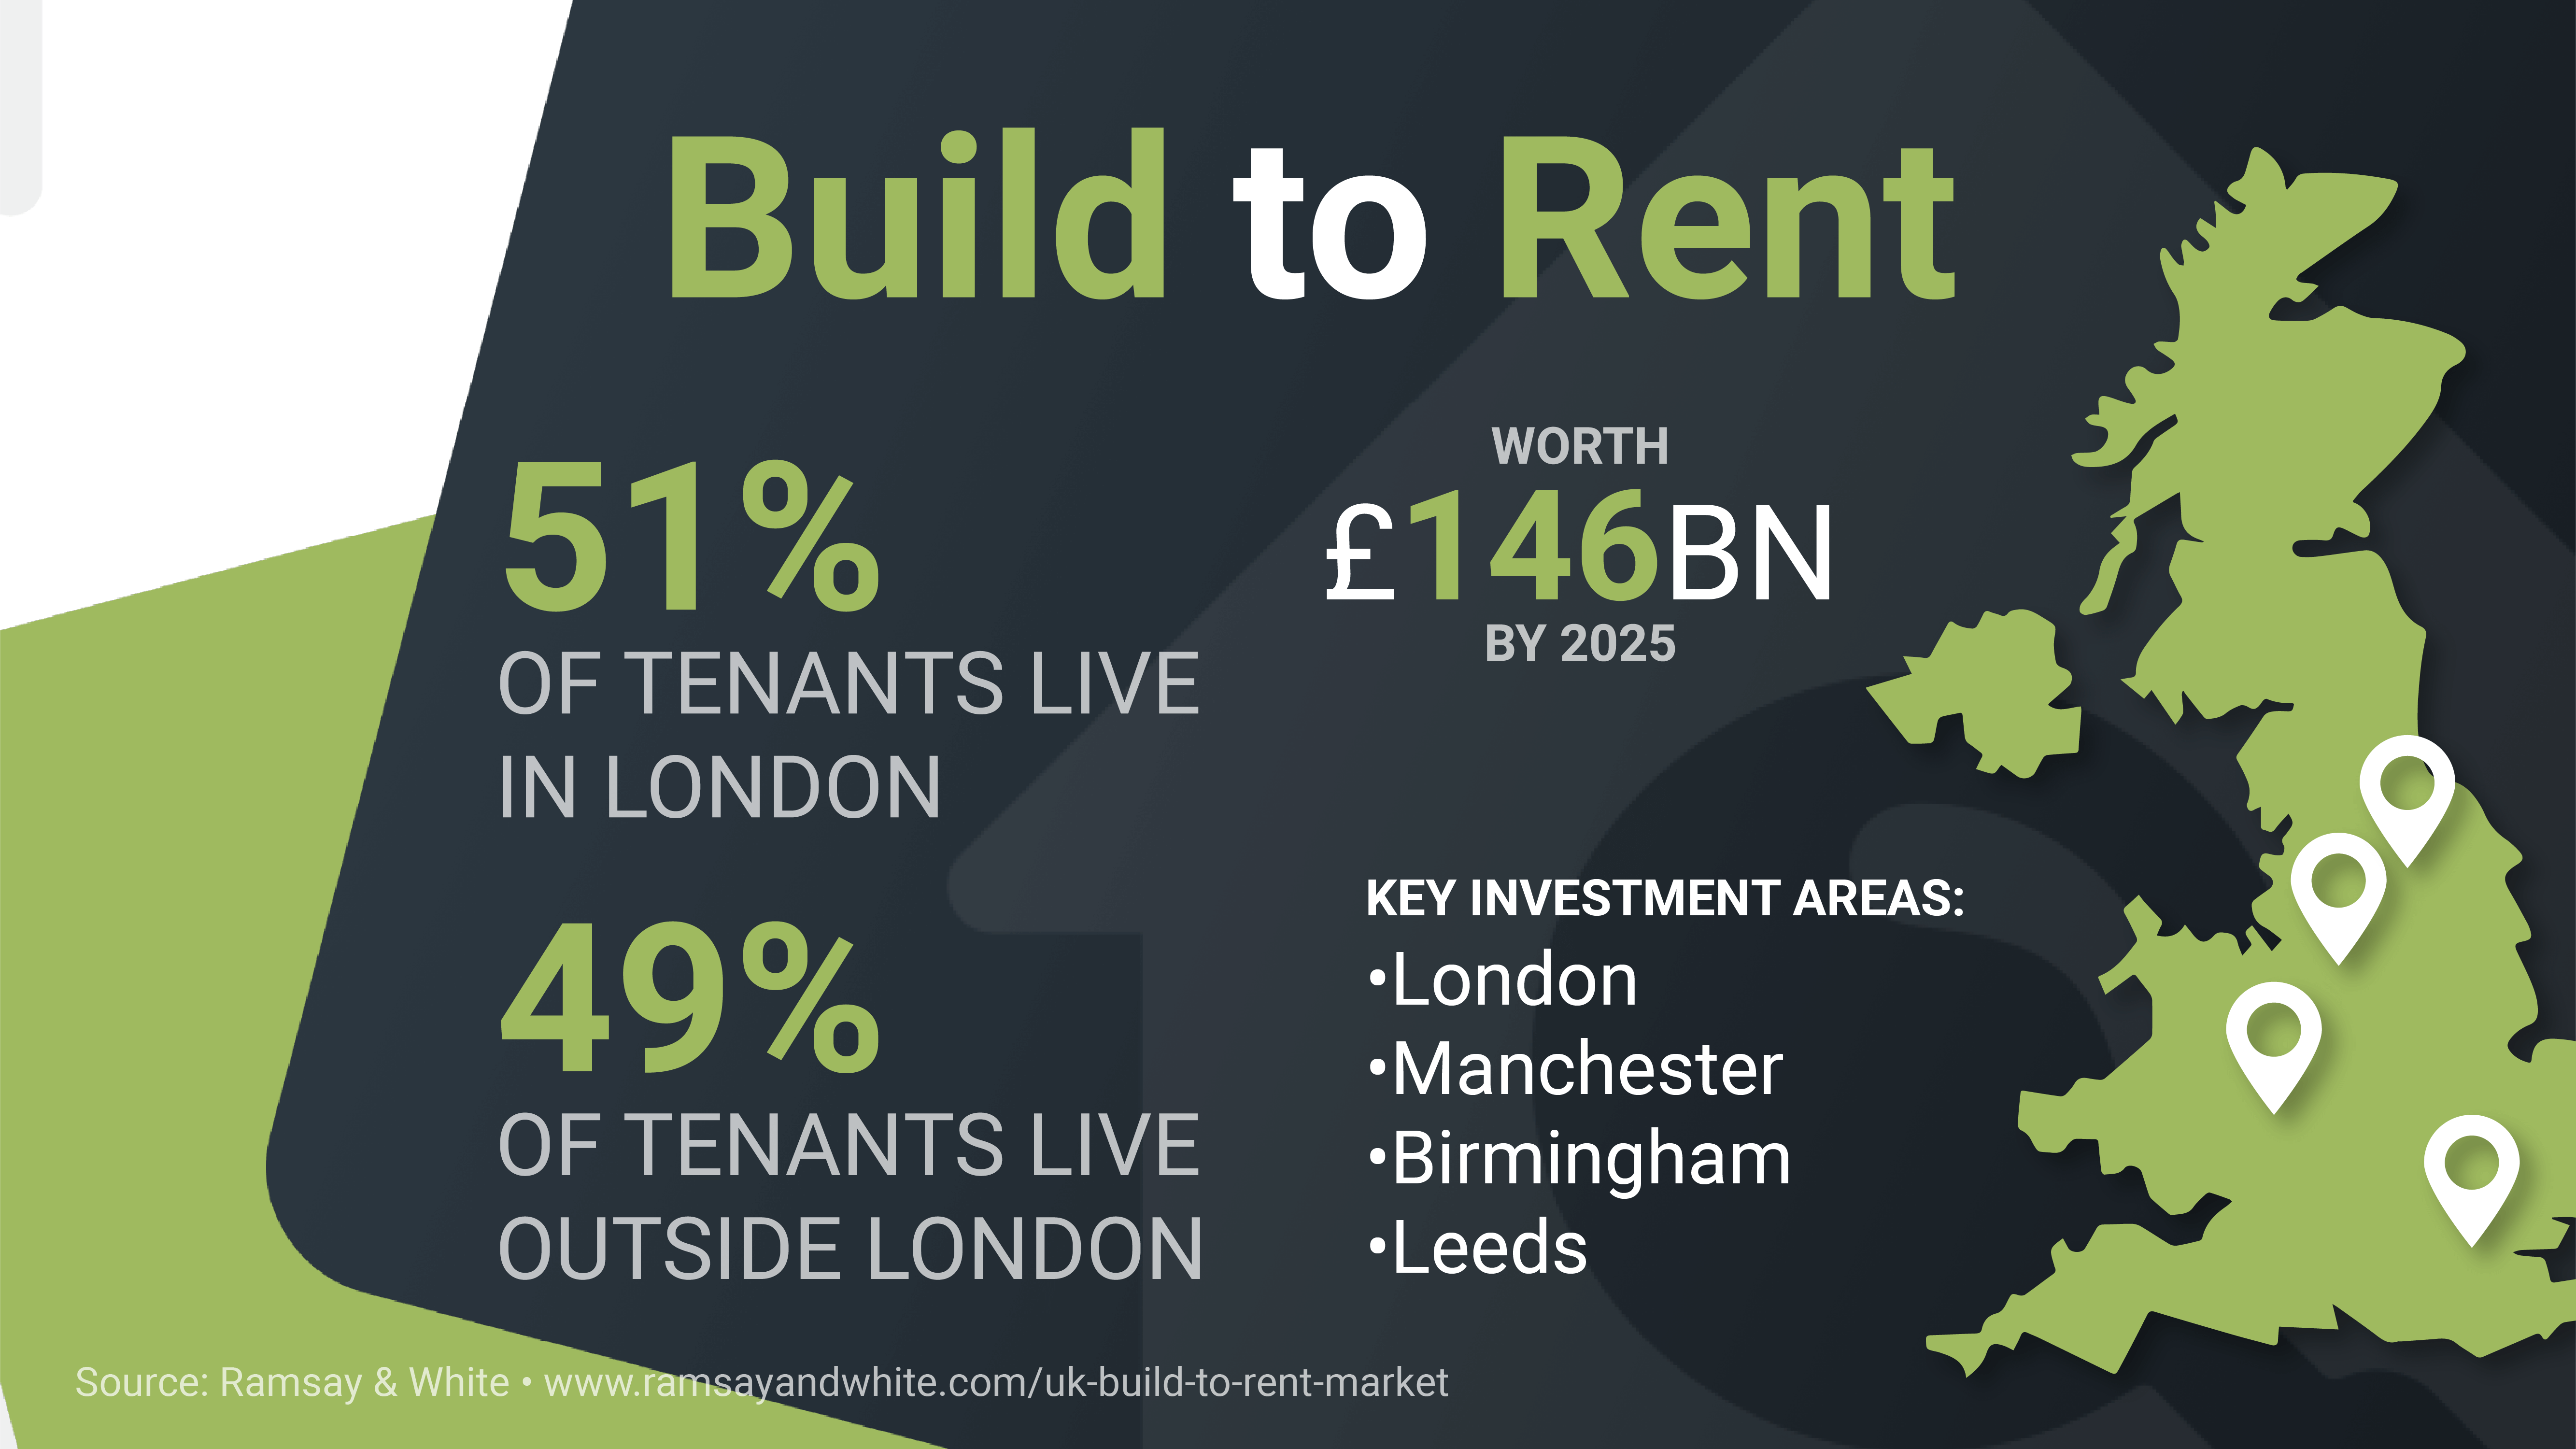 The Technology Empowering the Build to Rent Sector